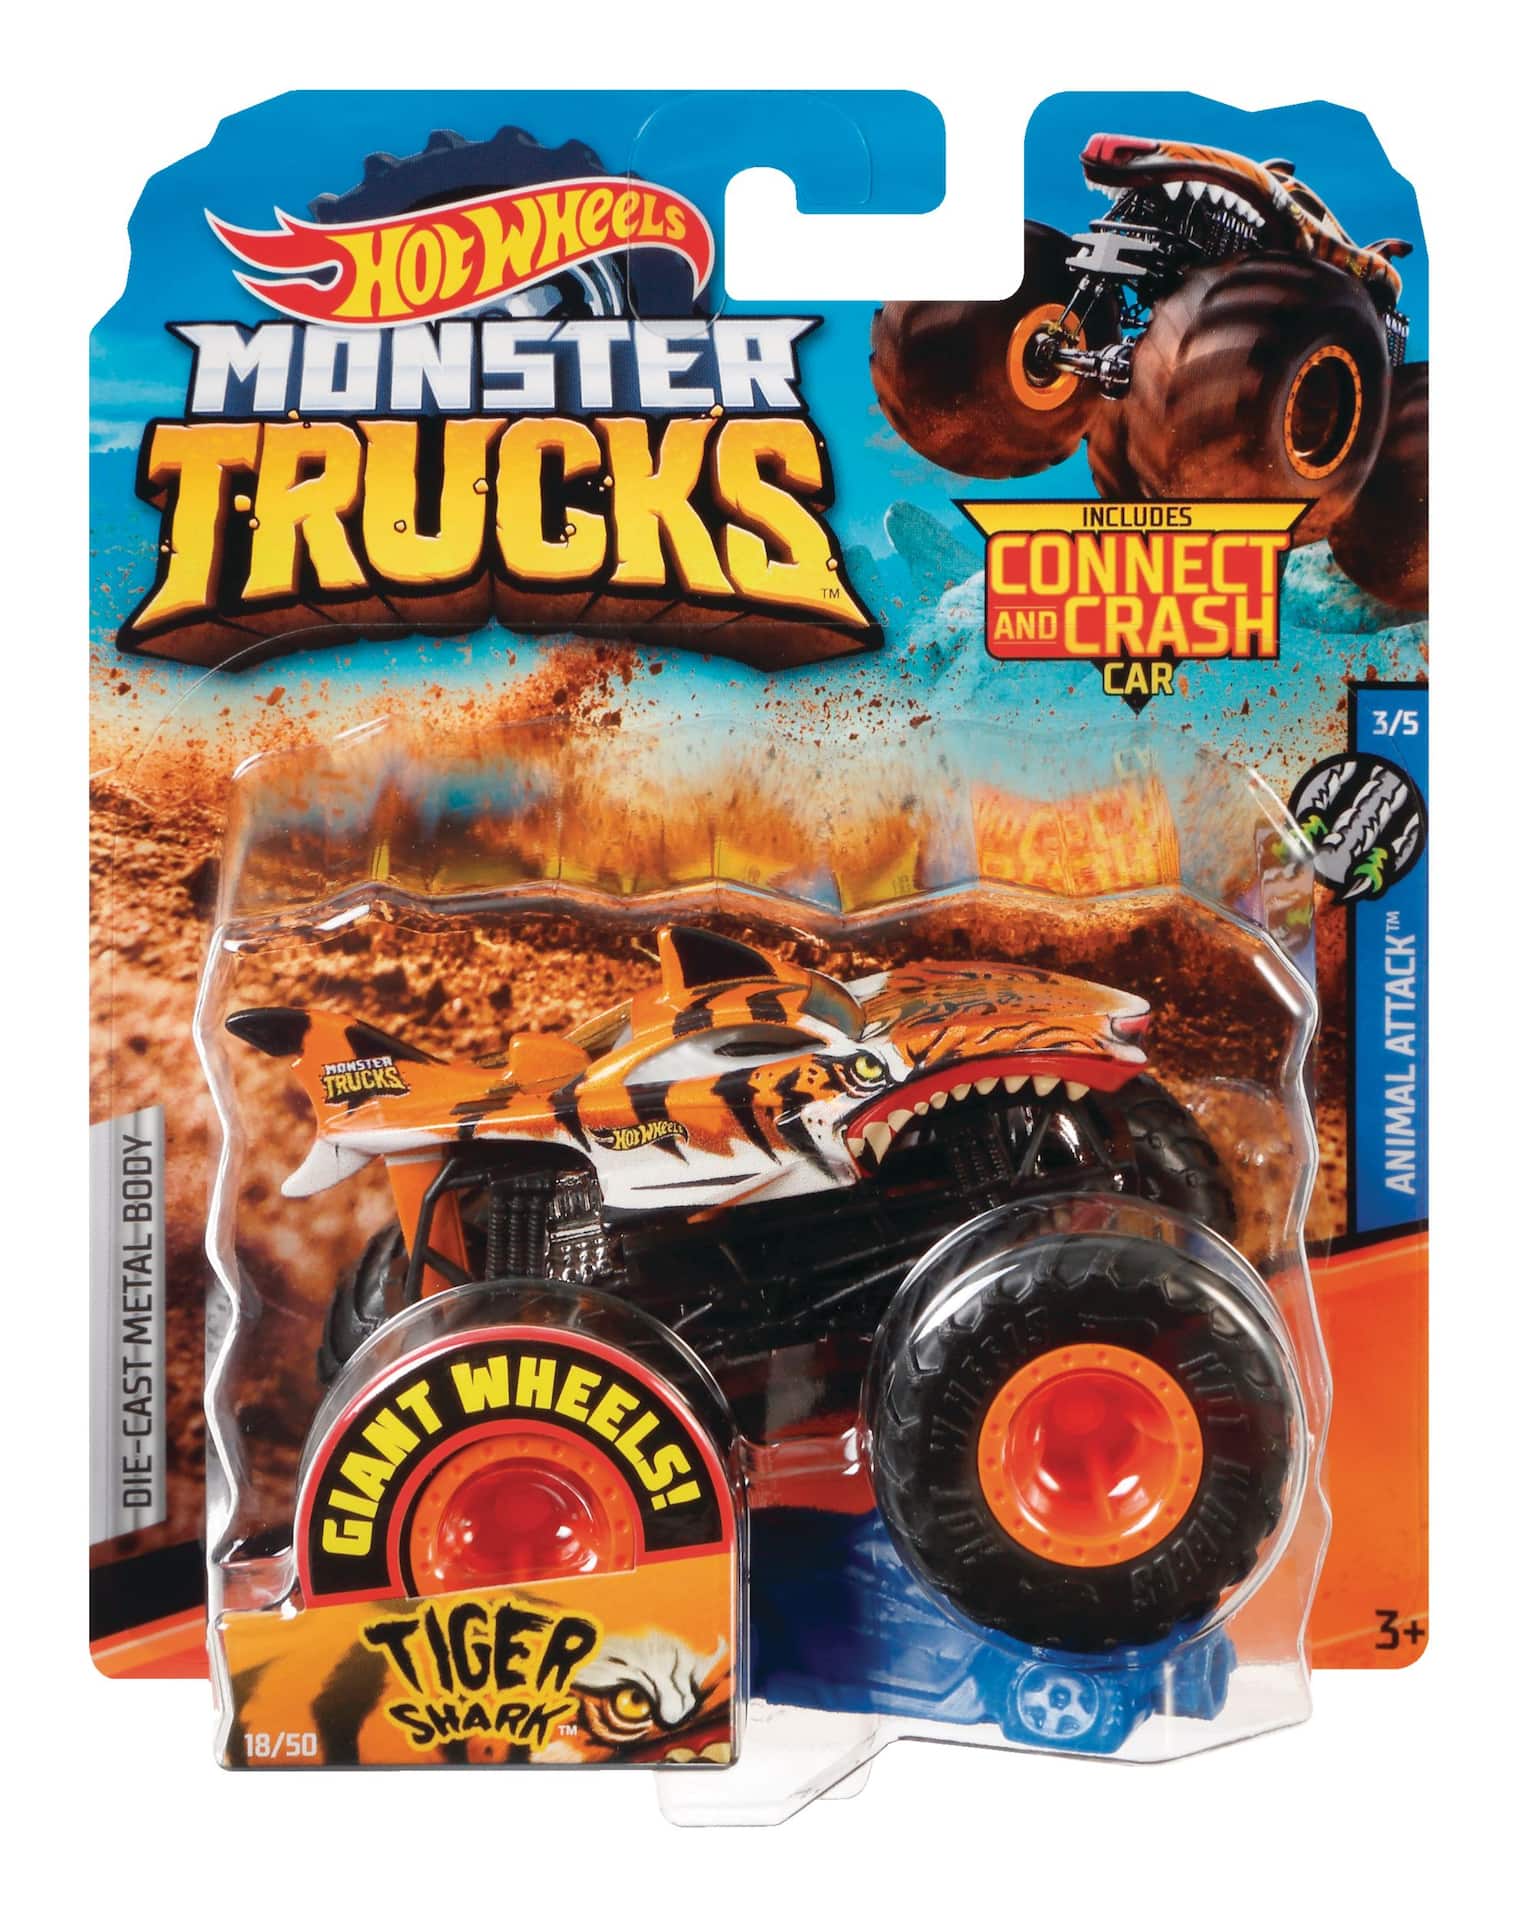 Hot Wheels 1:64 Die-Cast Monster Truck With Connect & Crash Car